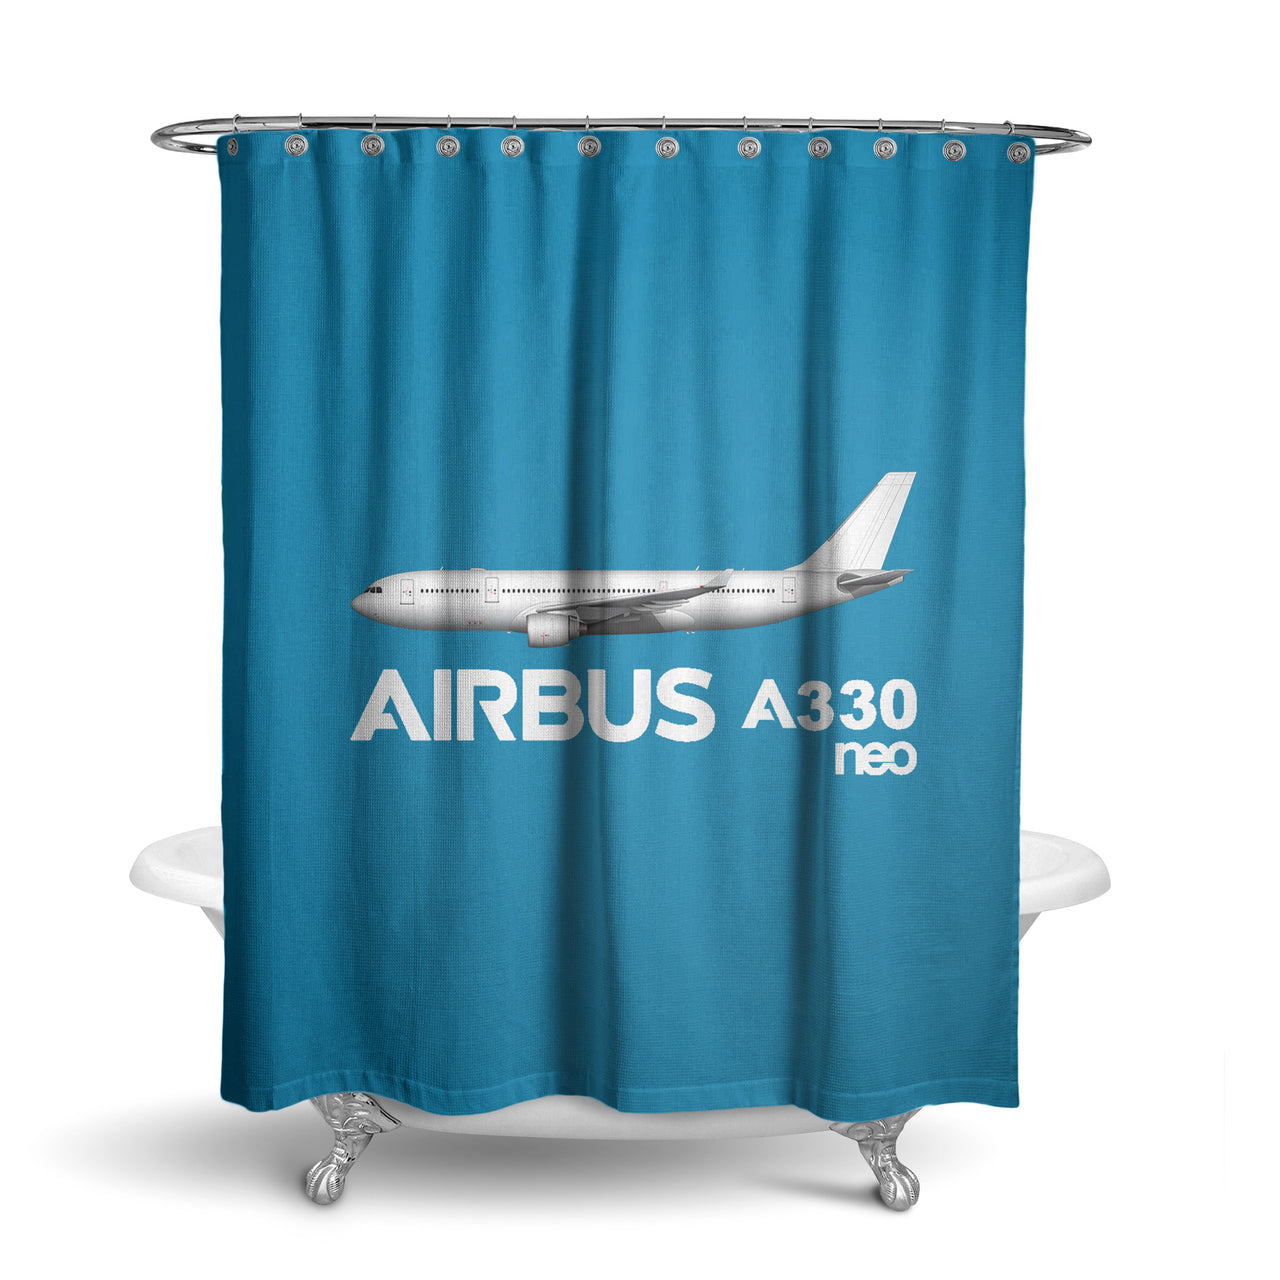 The Airbus A330neo Designed Shower Curtains